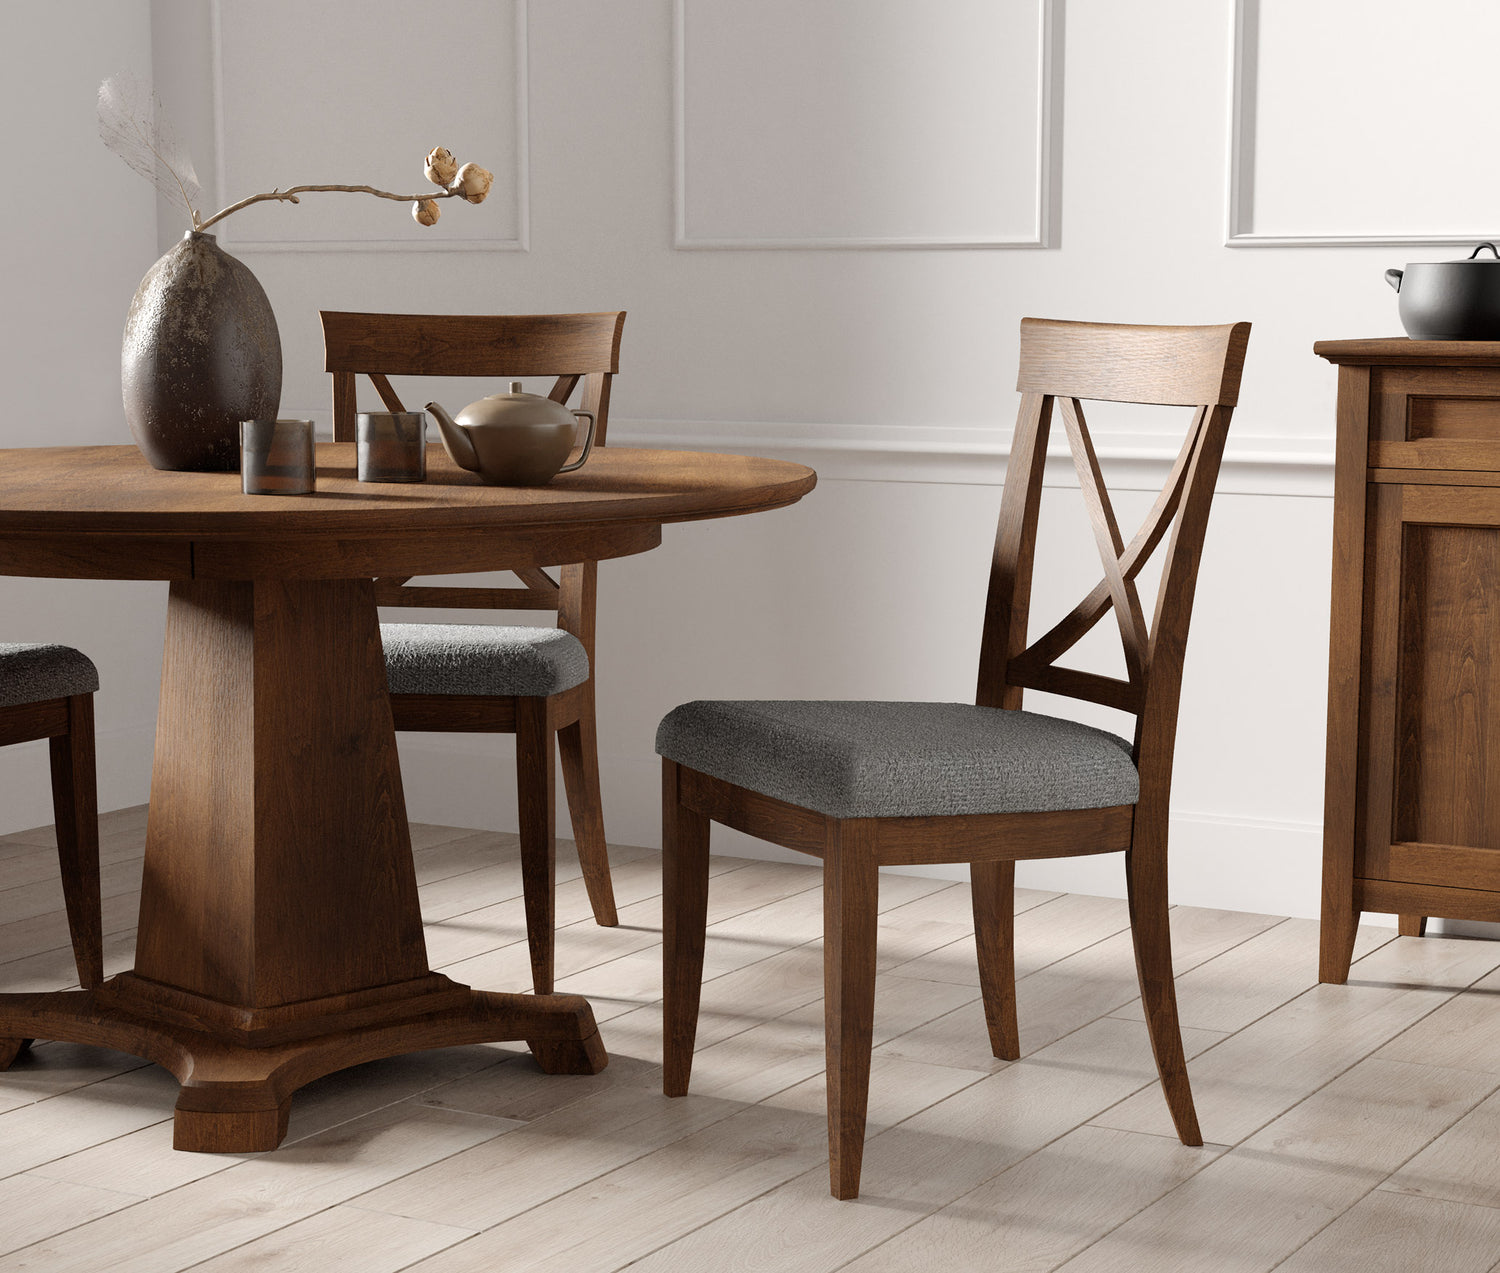 Origins by Stickley Revere dining room table and chairs